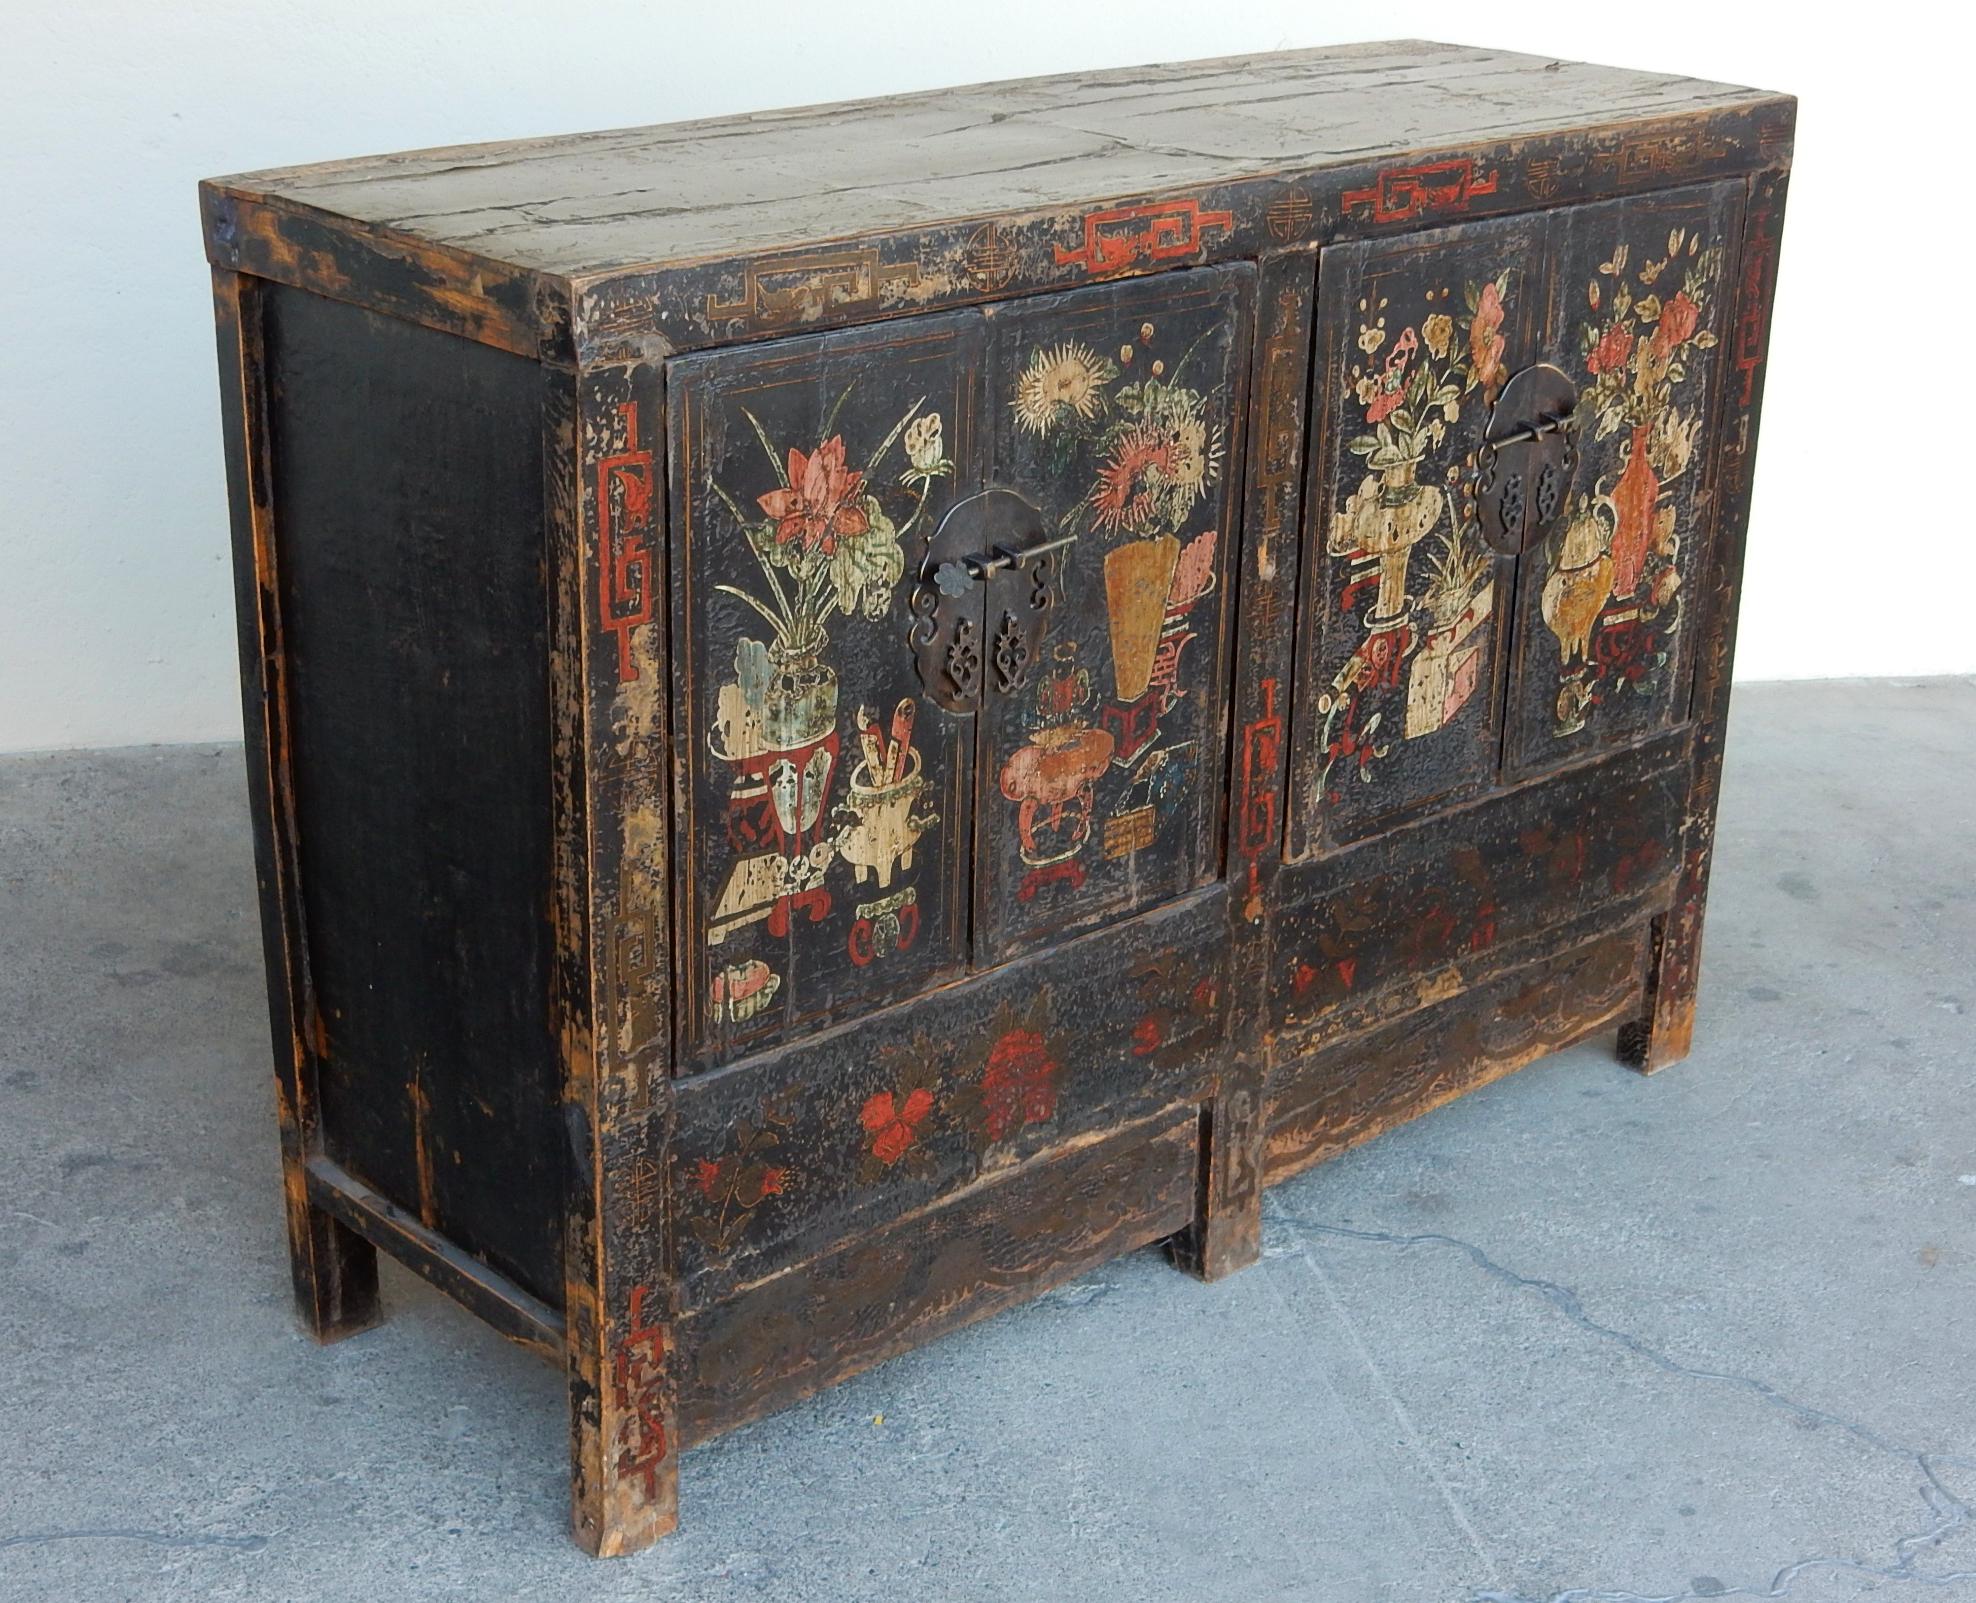 19th century Chinese apothecary lacquered cabinet.
Warm hand painted floral scenes on door fronts with 
large bronze medallion pulls.
Double doors on each side opening to deep storage with center shelves.
Completely original with no repairs. 
A